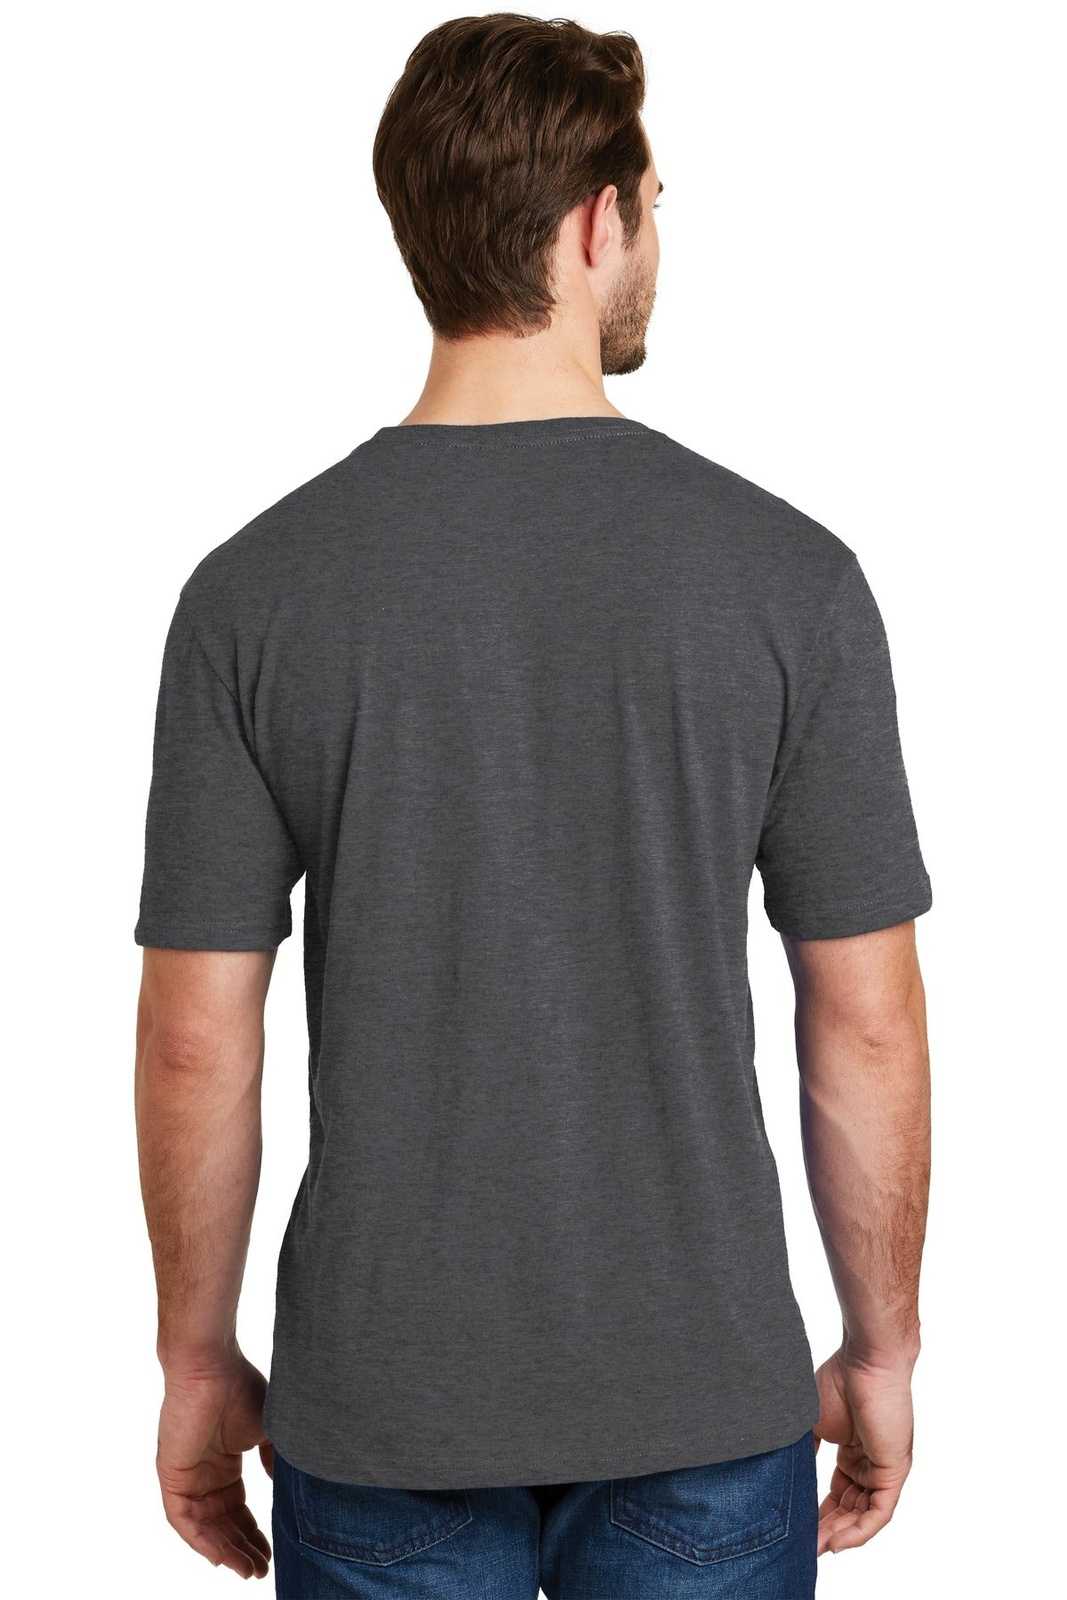 District DM108 Perfect Blend Tee - Heathered Charcoal - HIT a Double - 2